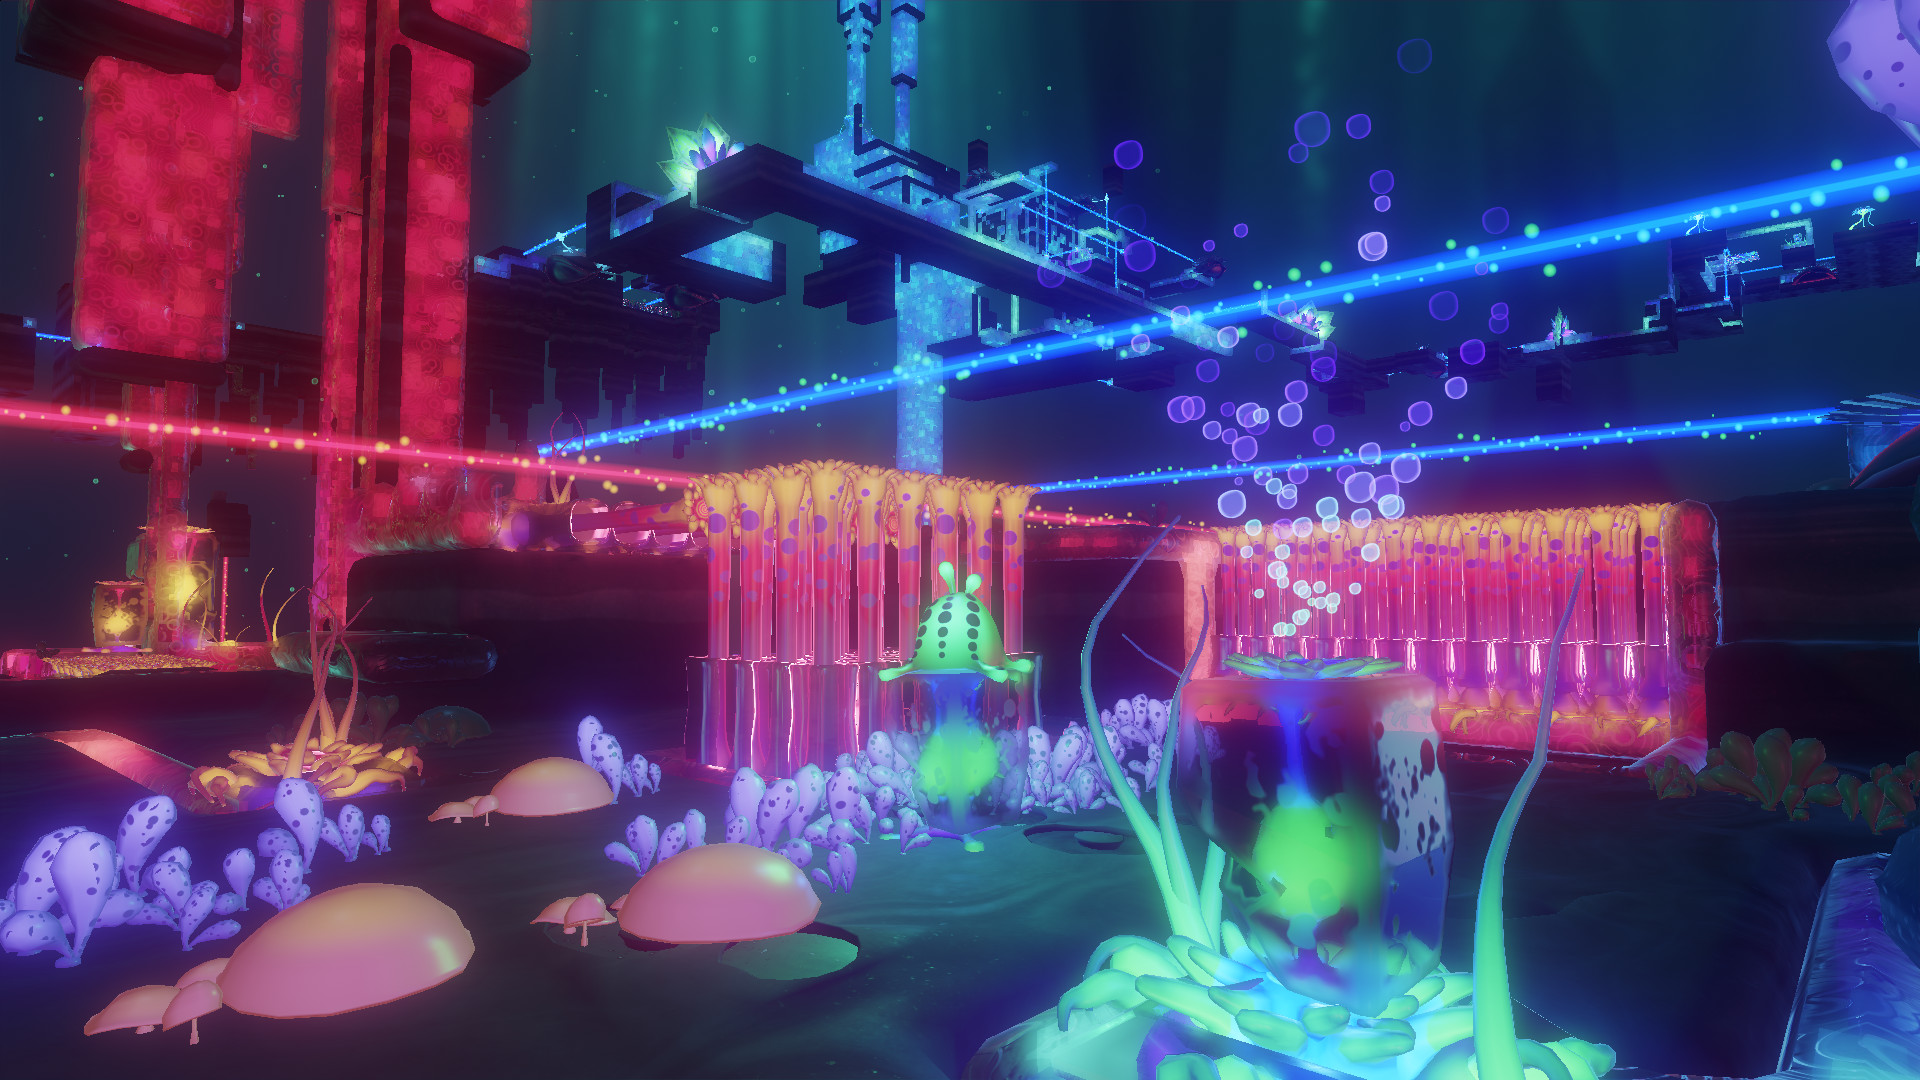 Bioluminescent puzzle-platformer Lumote: The Mastermote Chronicles launches in March 2022